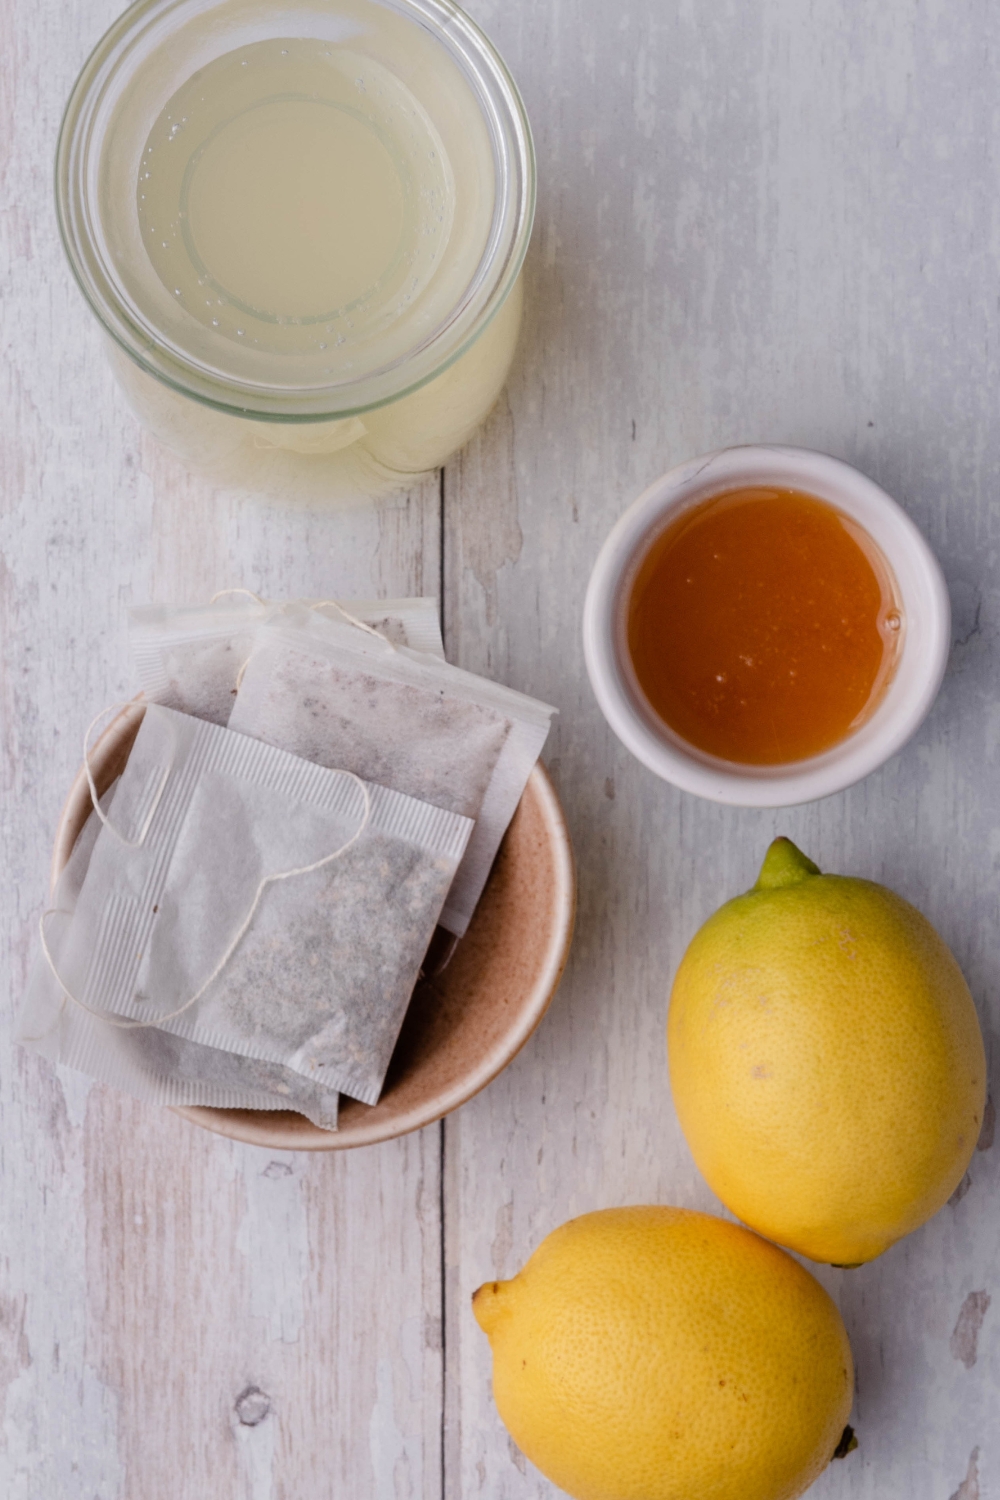 A countertop with a pitcher of lemon water, a bowl with tea bags, a small bowl with honey, and two lemons.